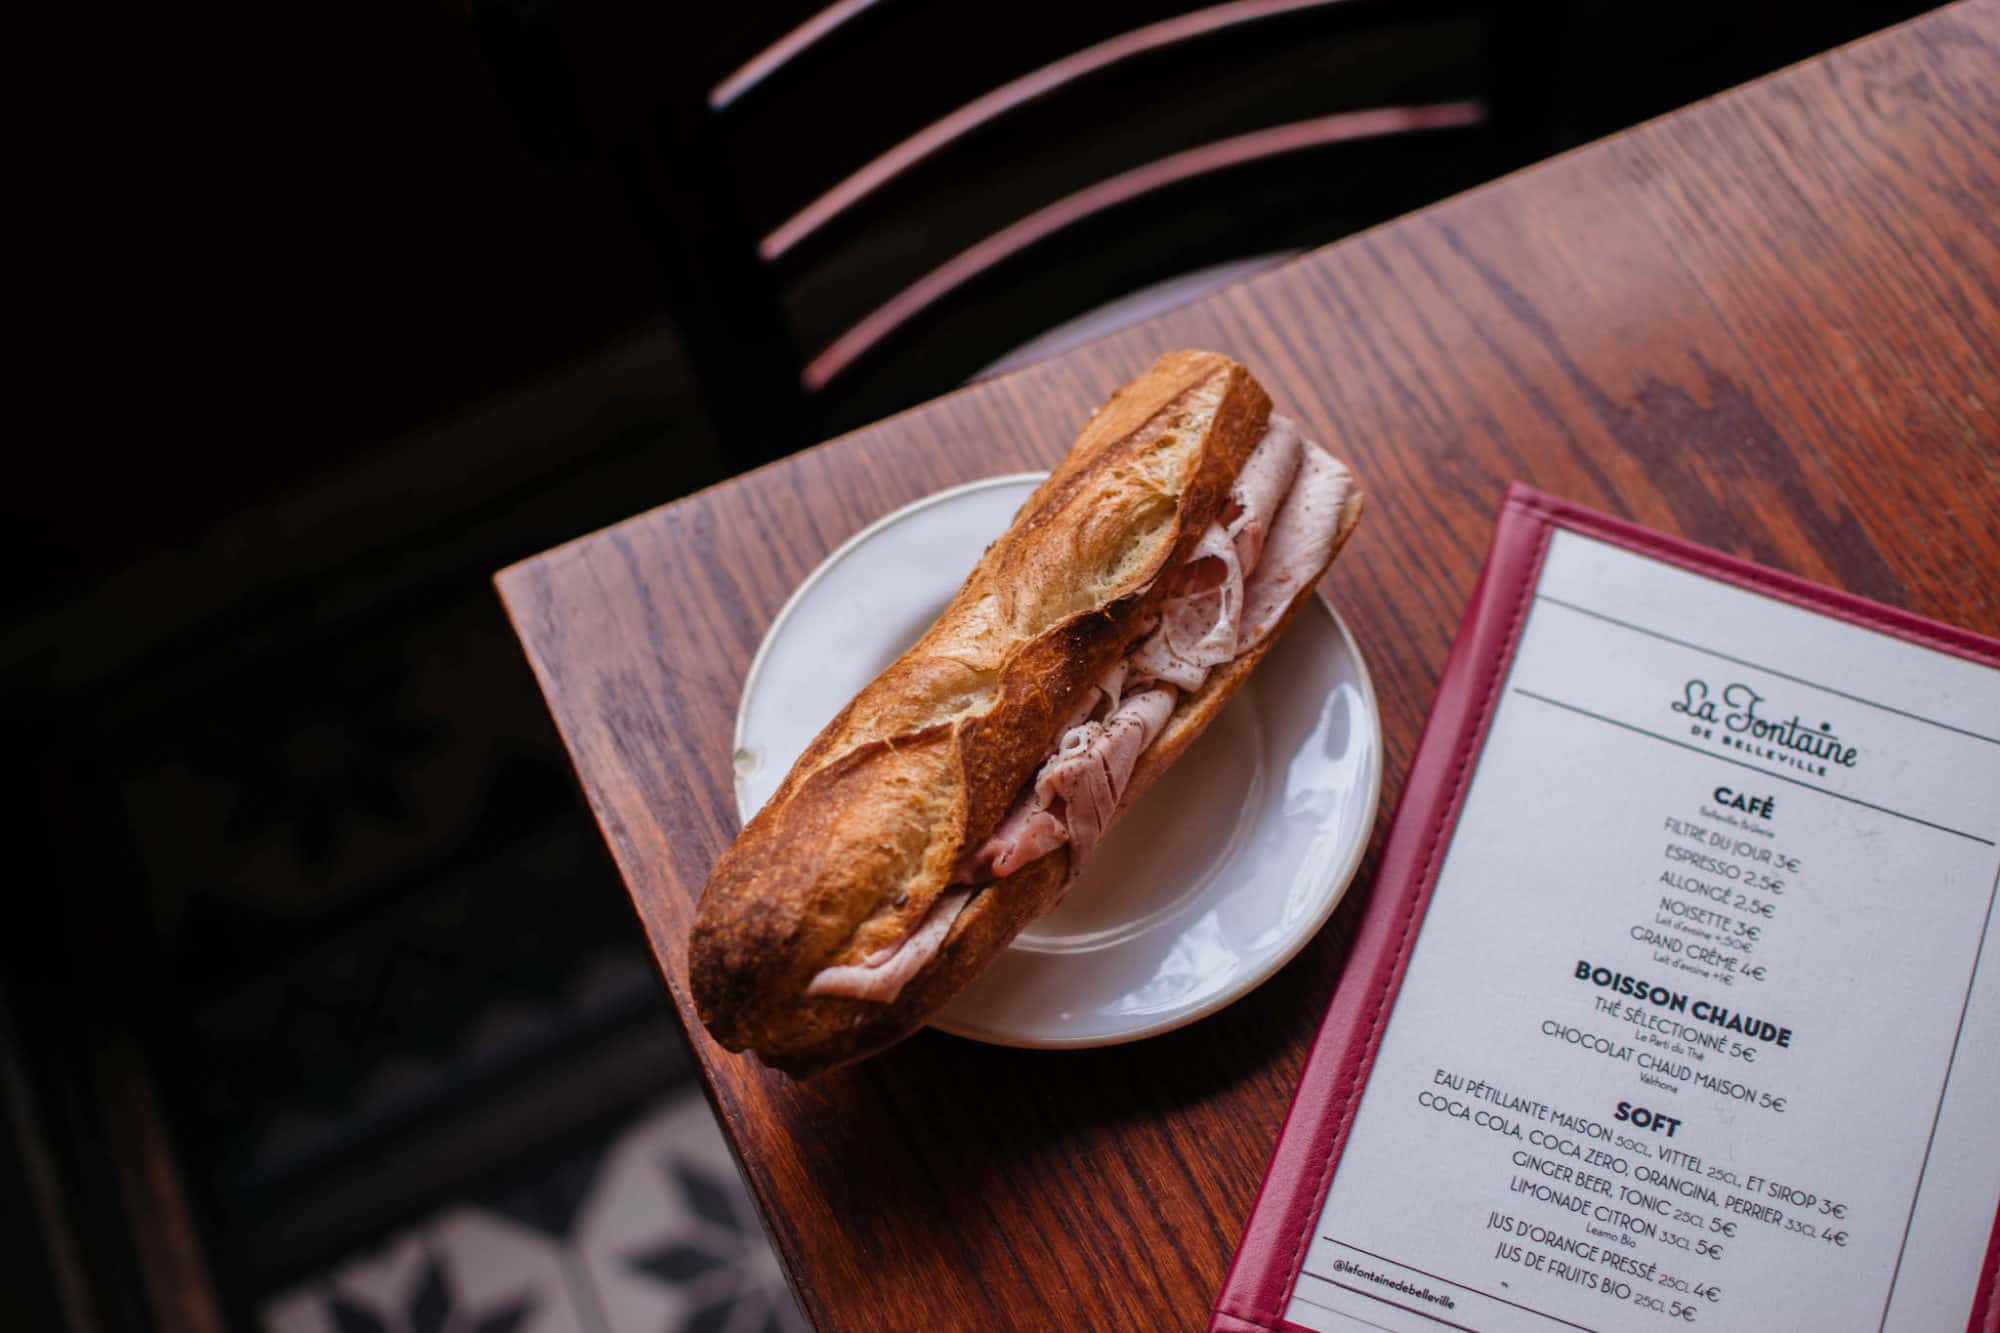 A crunchy baguette filled with ham at the Fontaine de Belleville coffee shop where David Lebovitz loves to eat.